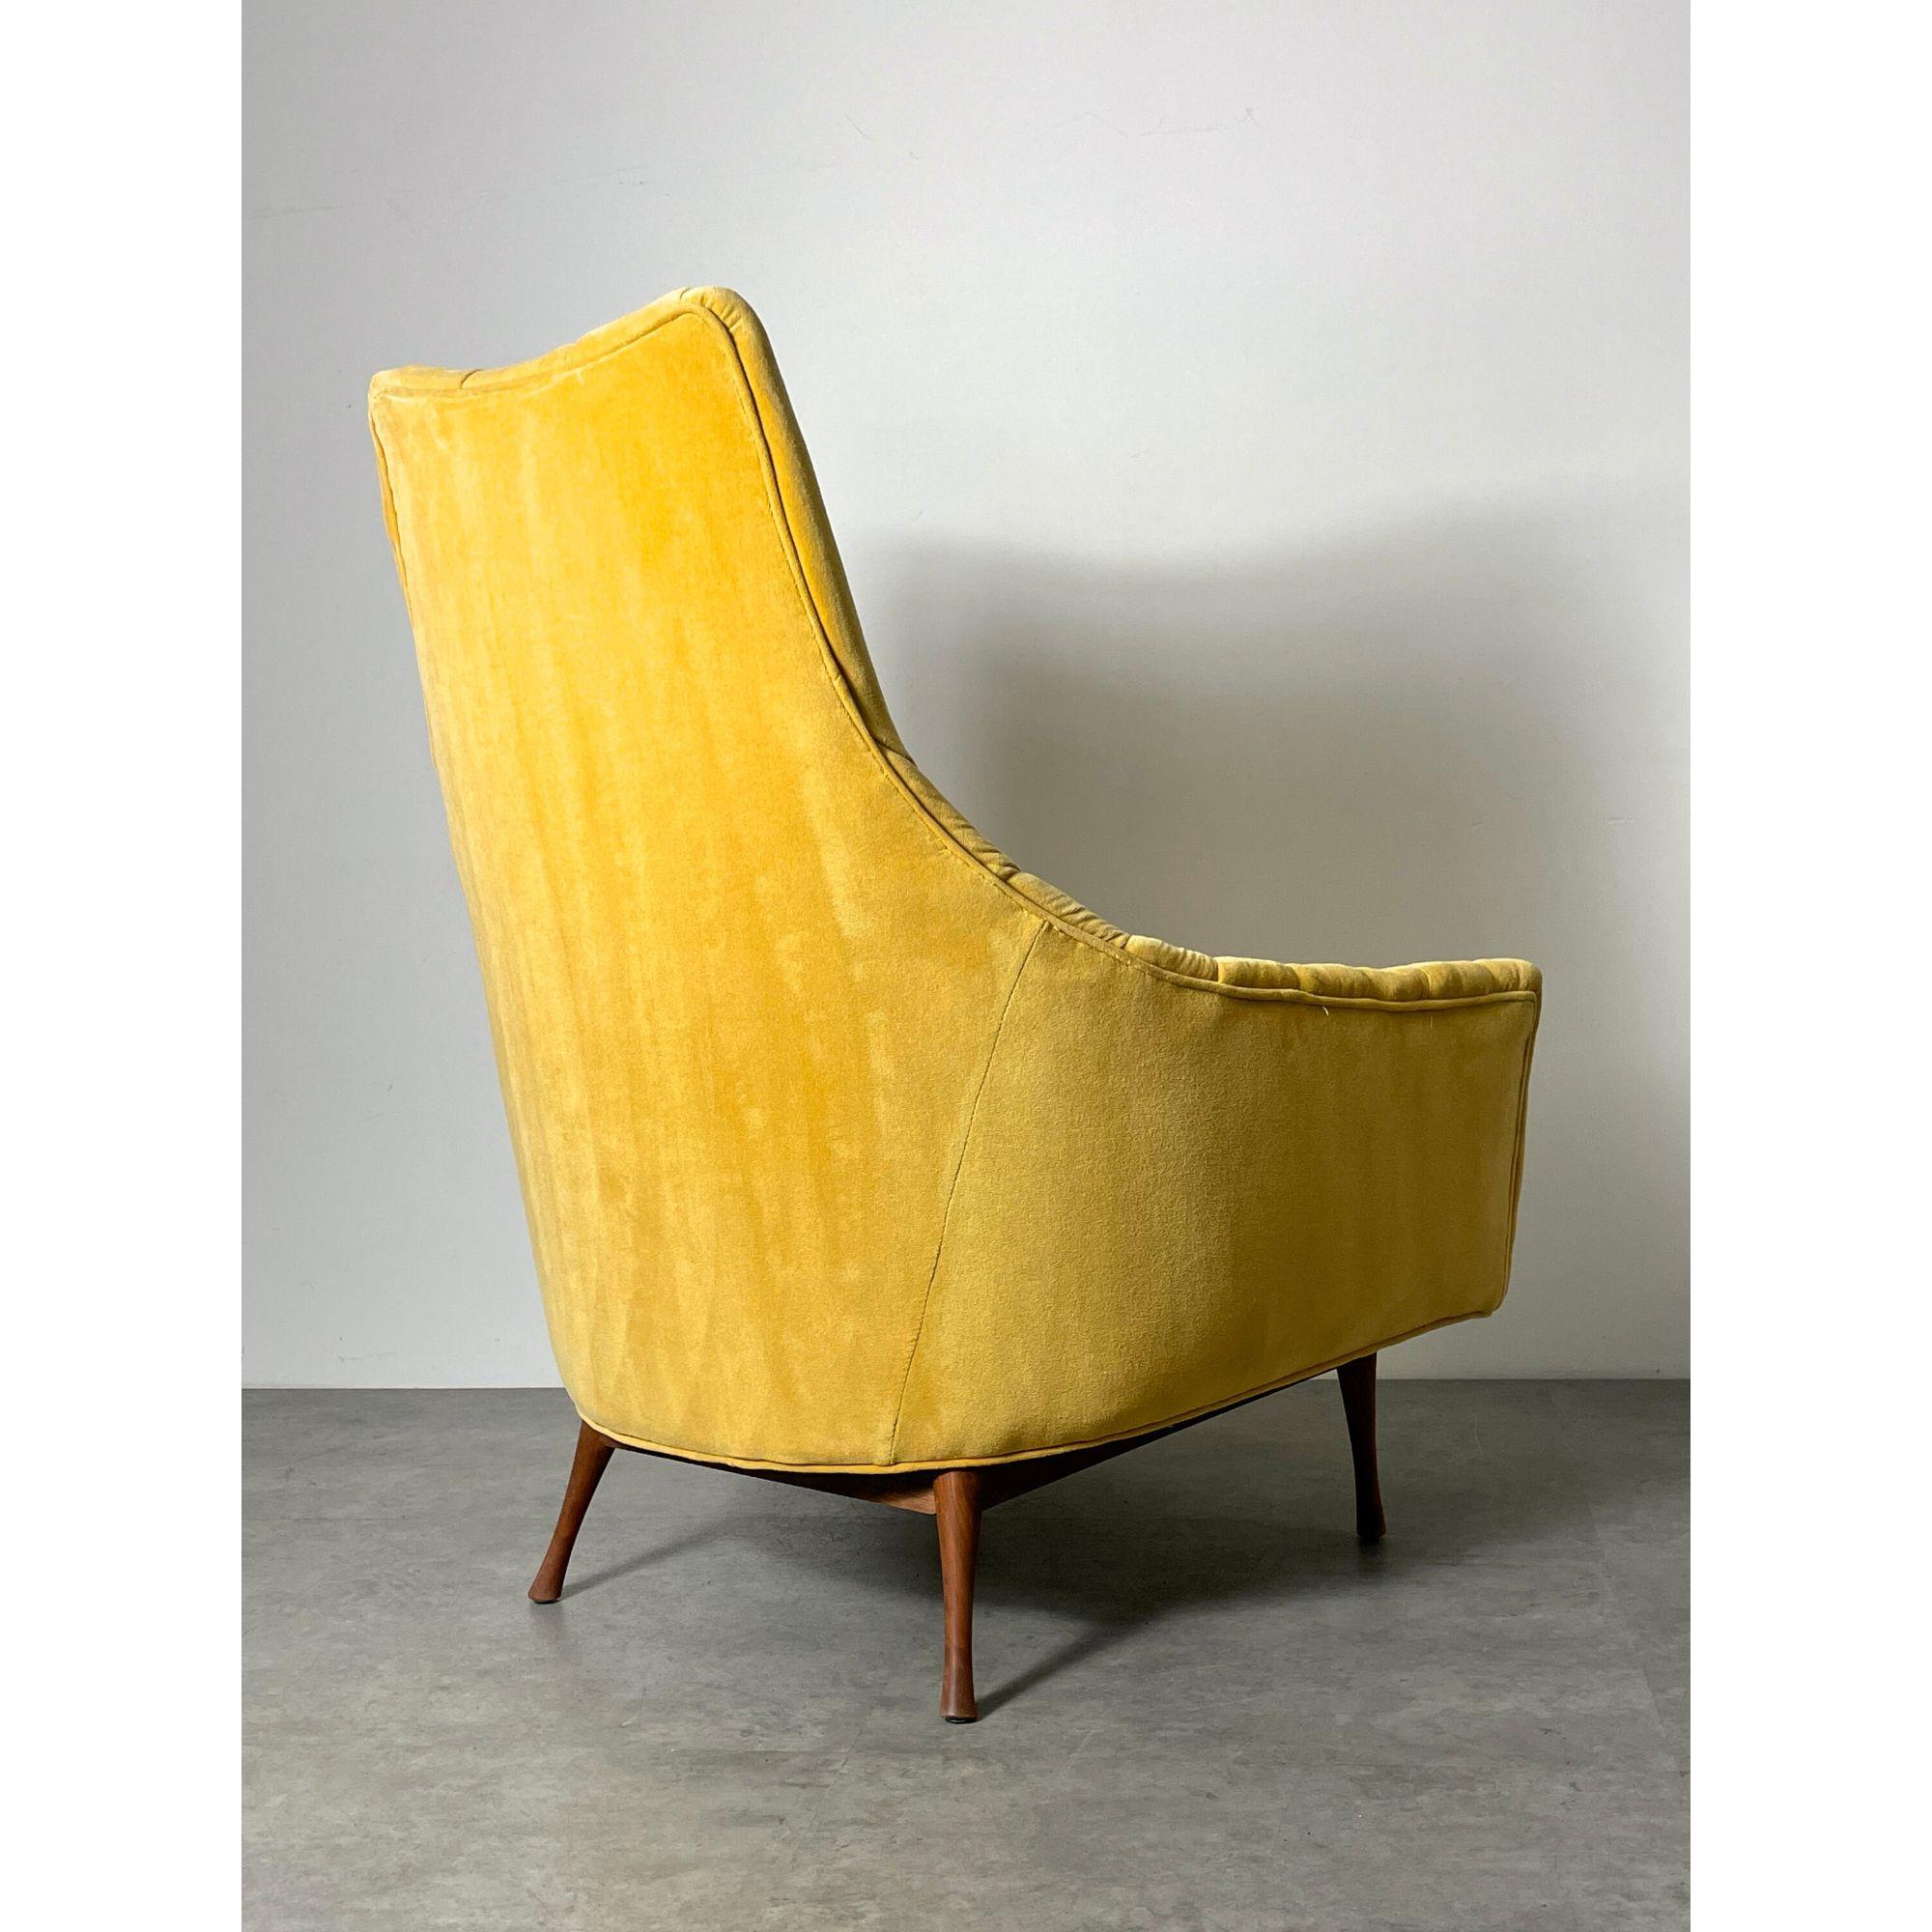 Walnut Vintage Yellow Symmetric Group Lounge Chair by Paul McCobb for Widdicomb 1960s